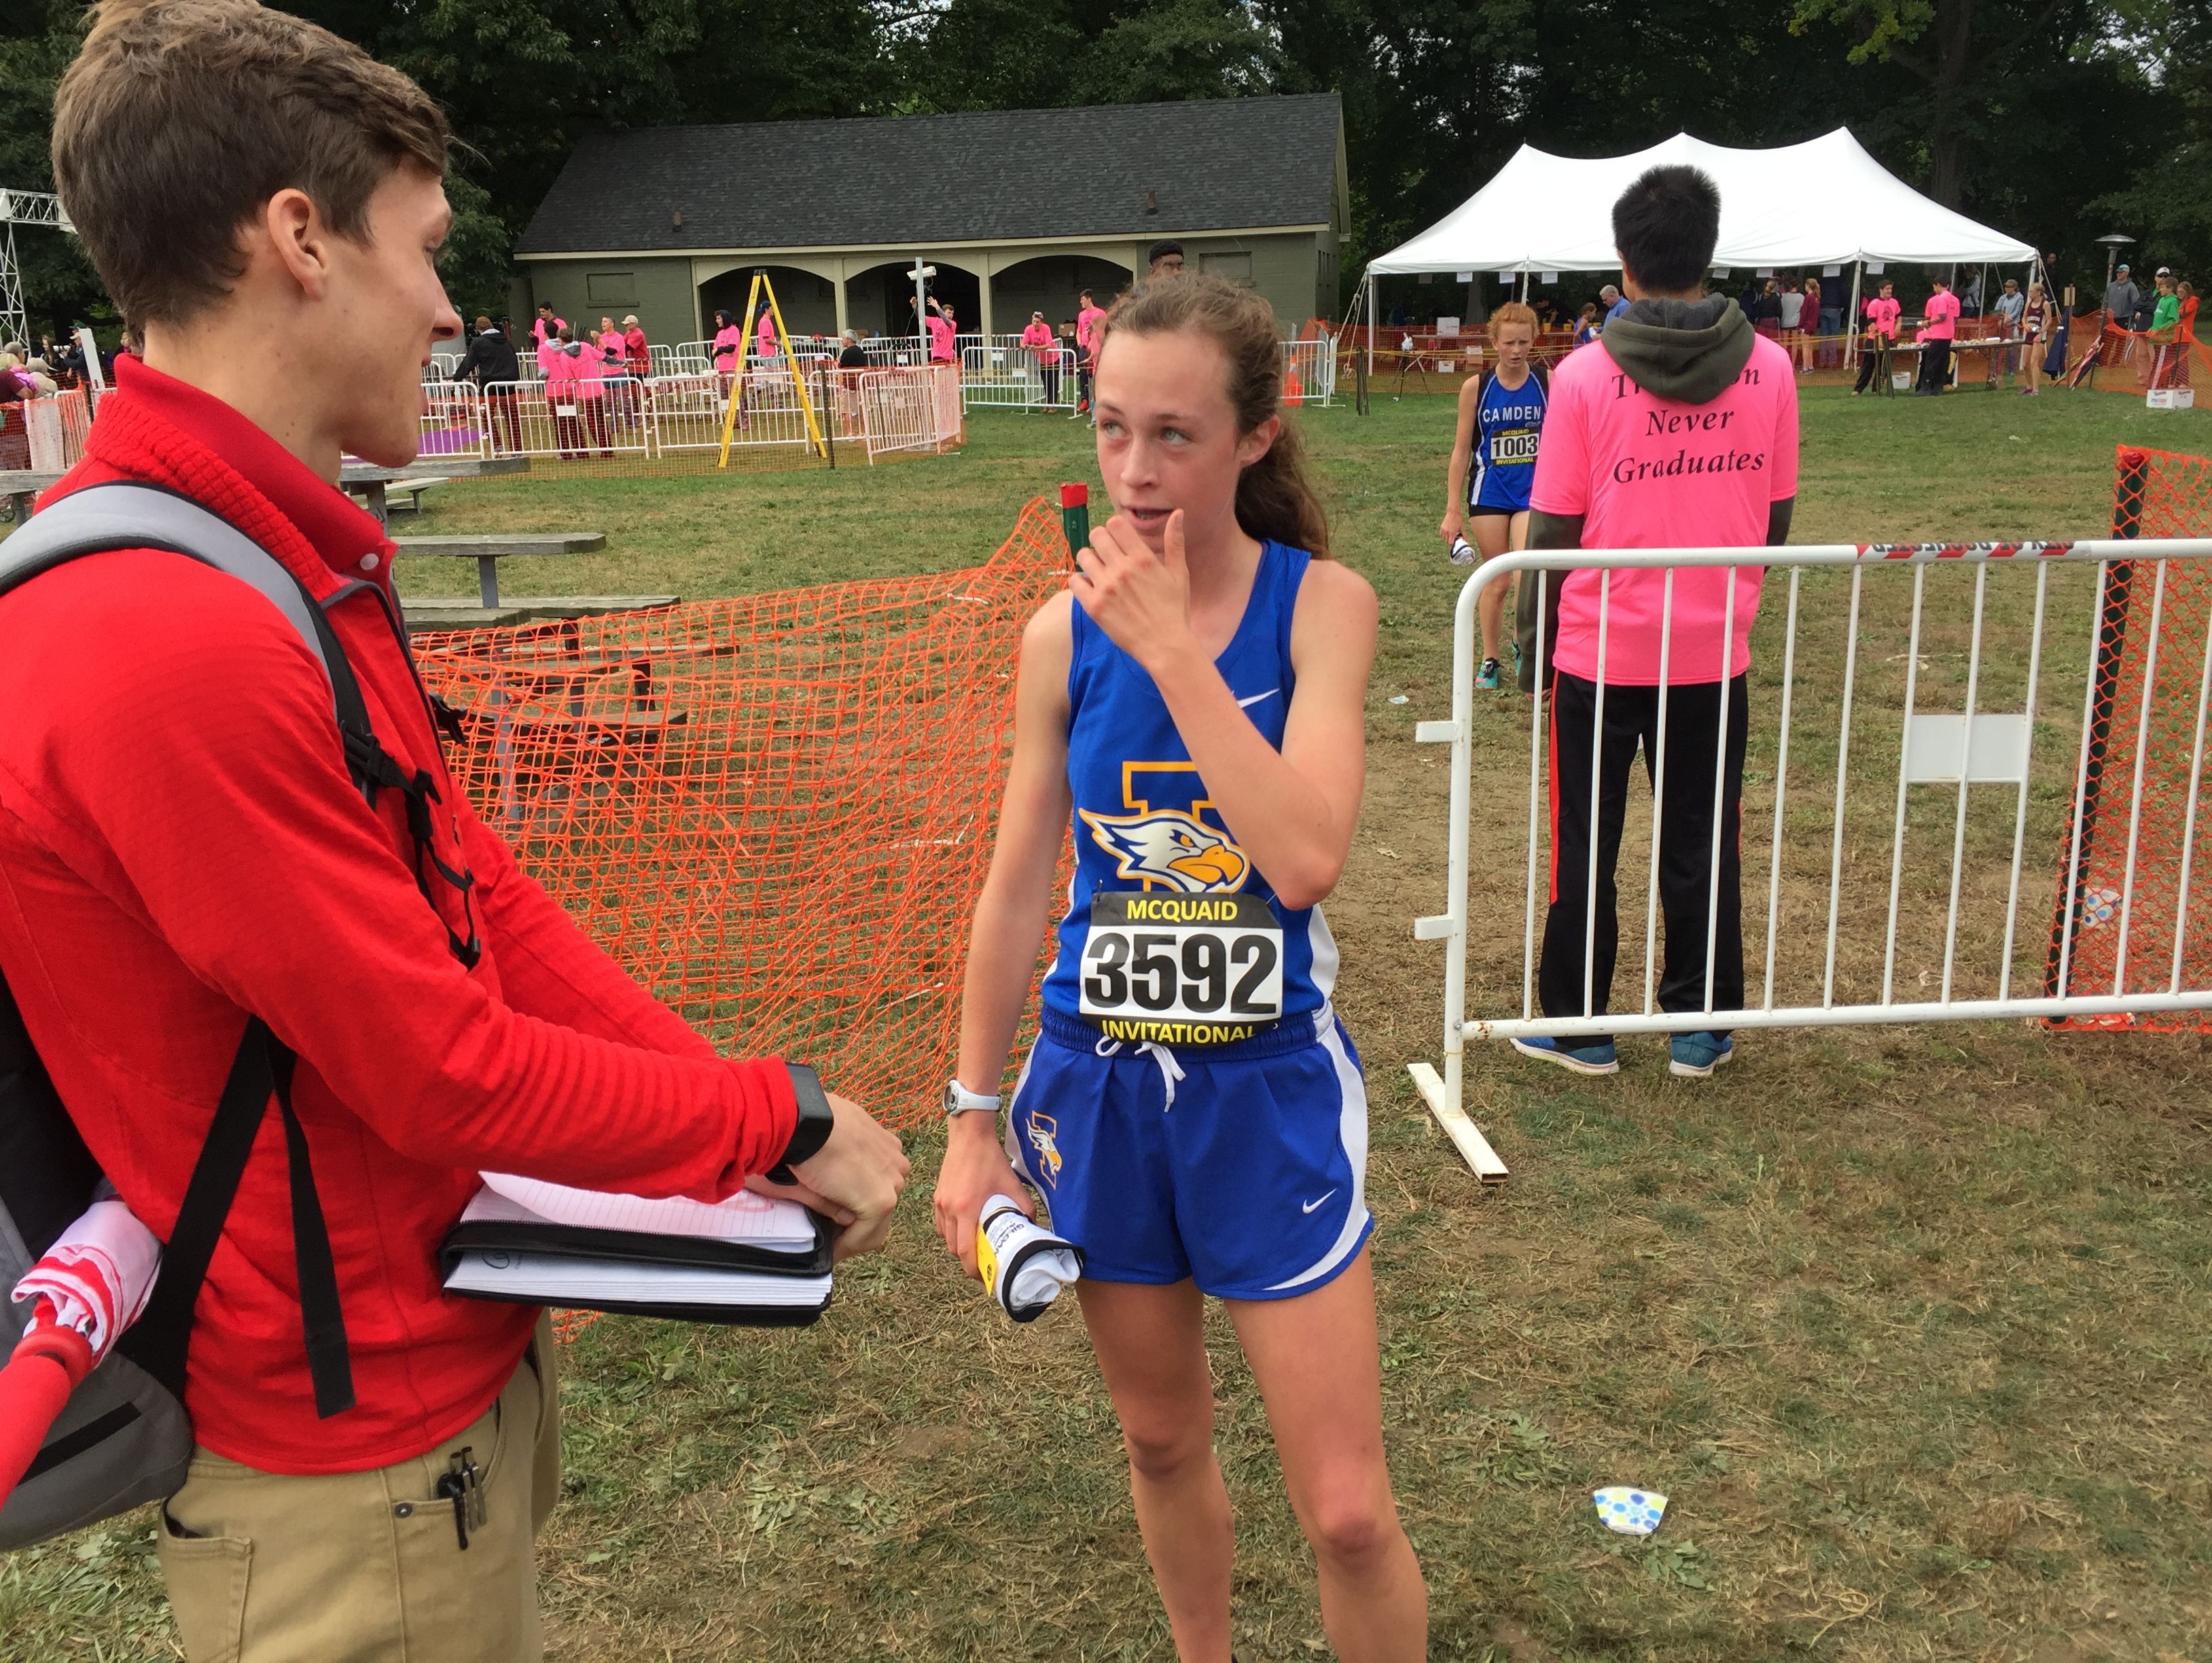 Section V Cross Country 3 things to watch USA TODAY High School Sports